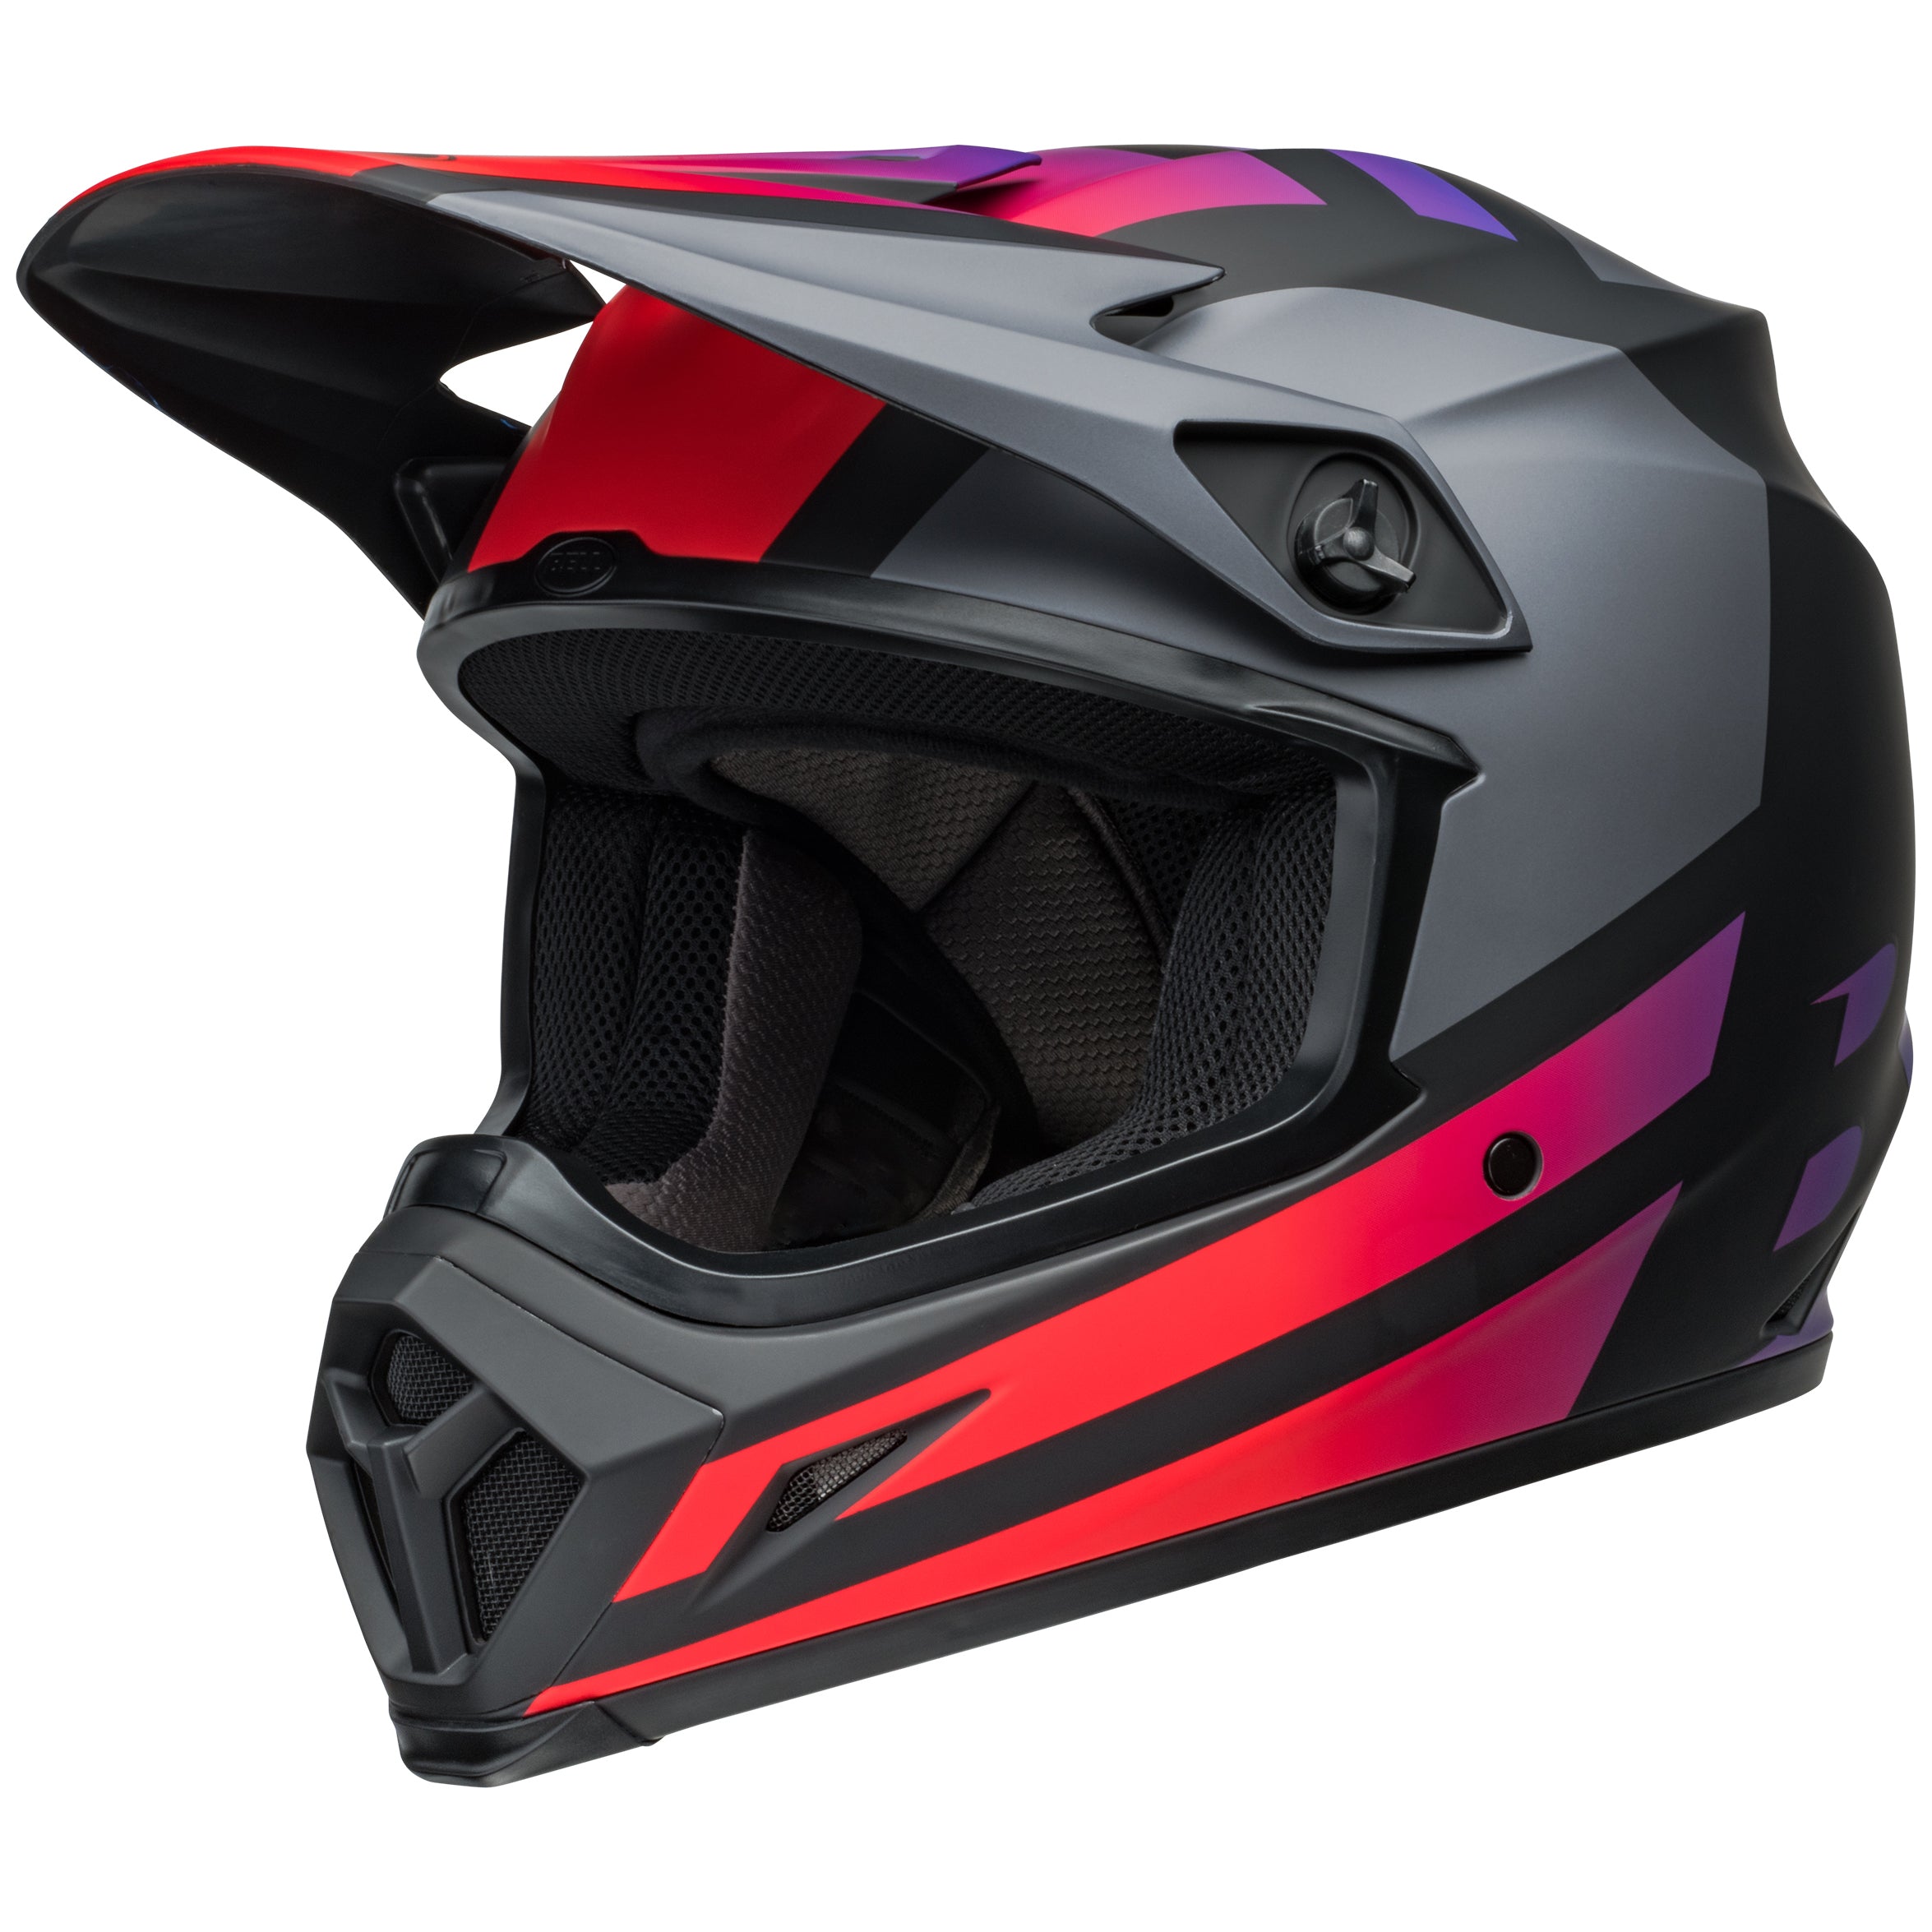 Bell MX 2024 MX-9 Mips Adult Helmet in Alter EGO Black/Red color scheme, ECE6 certified, showcasing side and frontal views